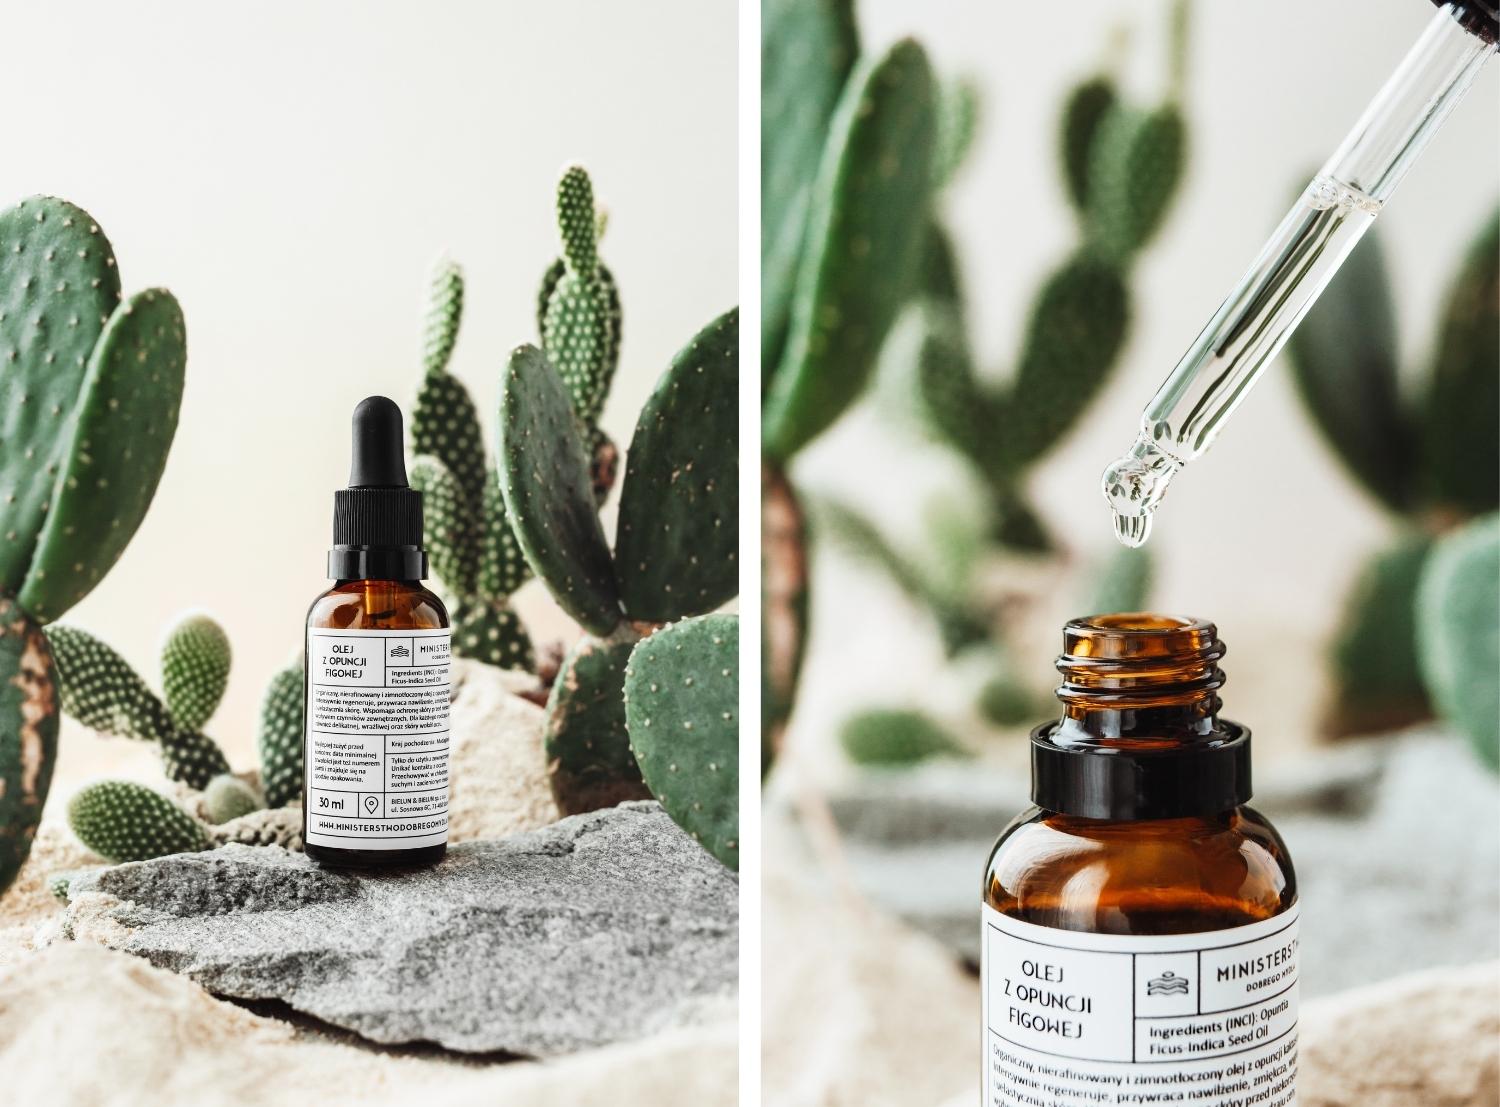 Pricky Pear Seed Oil Is Going to Be Your New Skincare Obsession – BLUNT  SKINCARE